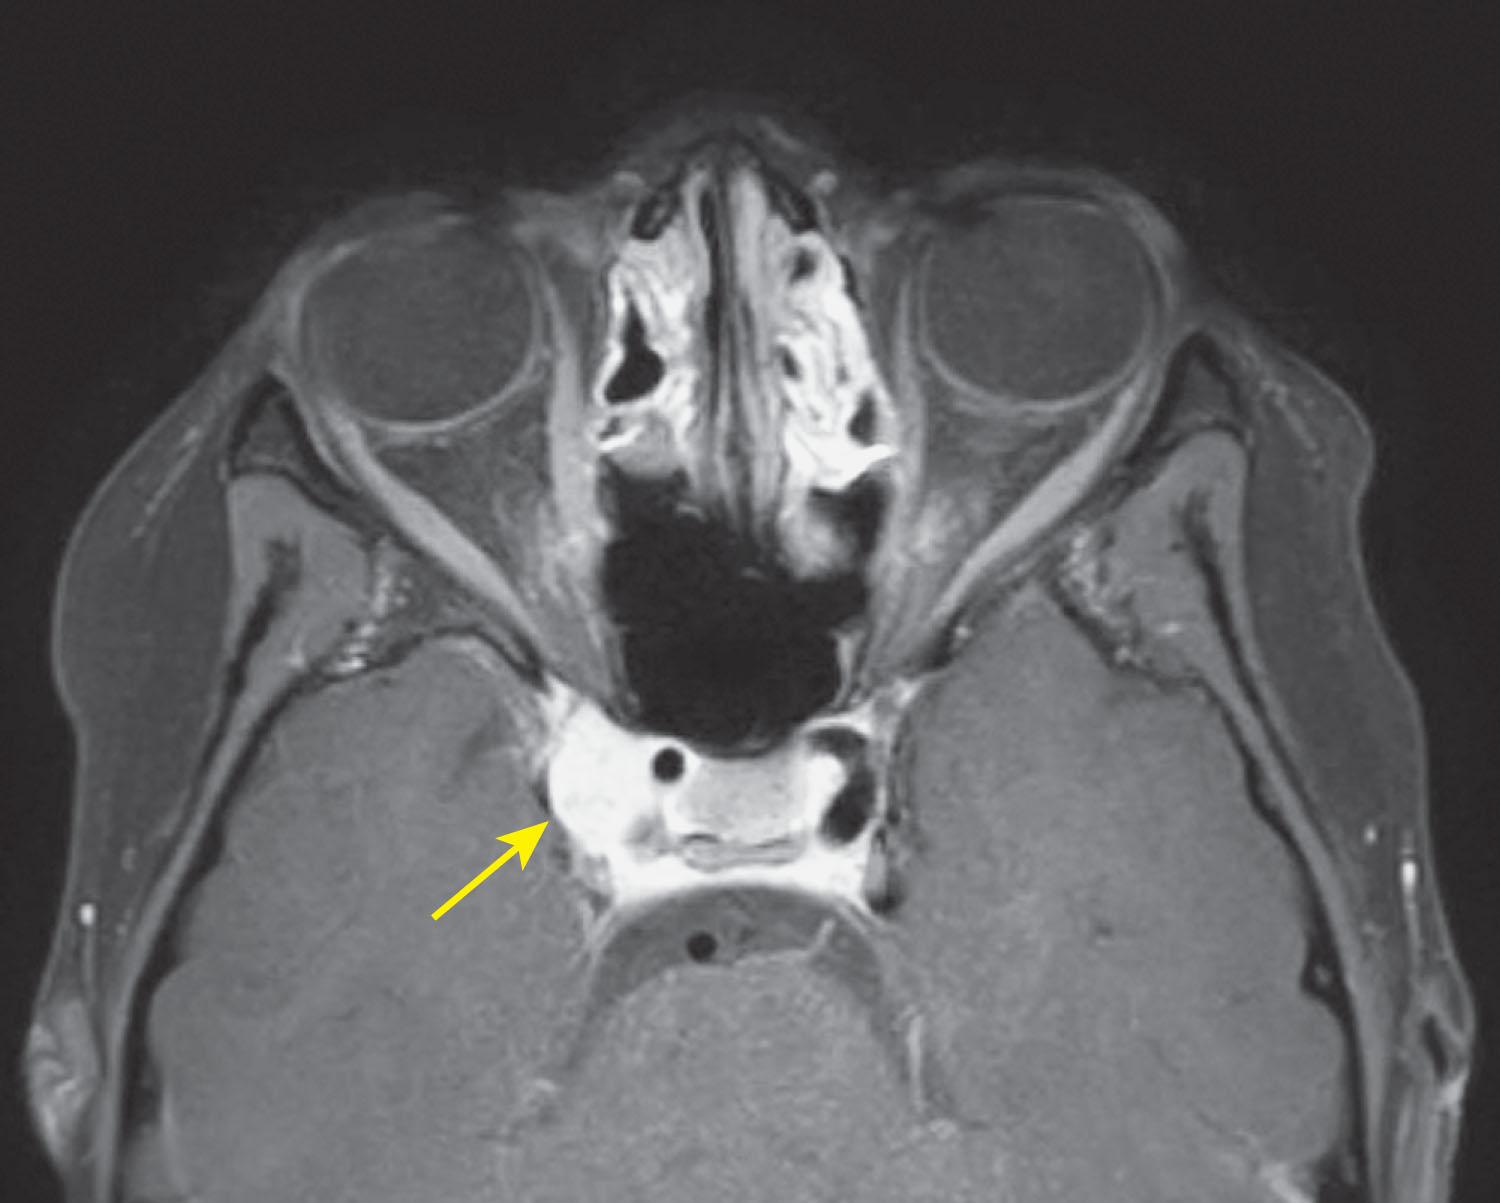 Fig. 85.3, Acquired partial right third nerve palsy. Axial T1-weighted fat-suppressed magnetic resonance imaging scan revealing a right cavernous sinus hemangioma (yellow arrow) in a patient with a partial right third nerve palsy.